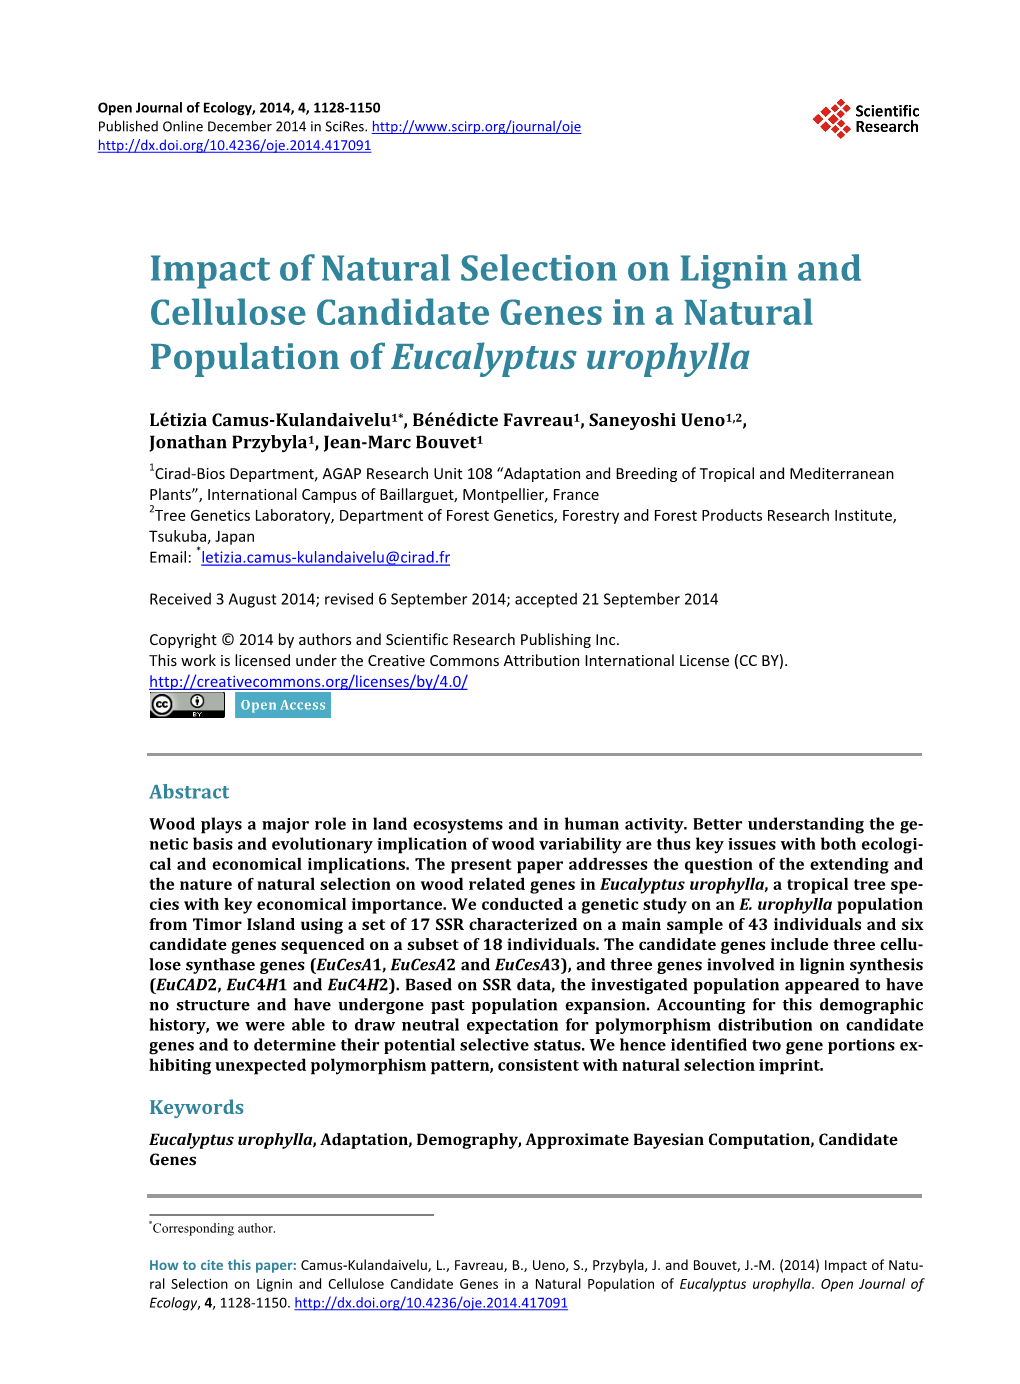 Impact of Natural Selection on Lignin and Cellulose Candidate Genes in a Natural Population of Eucalyptus Urophylla